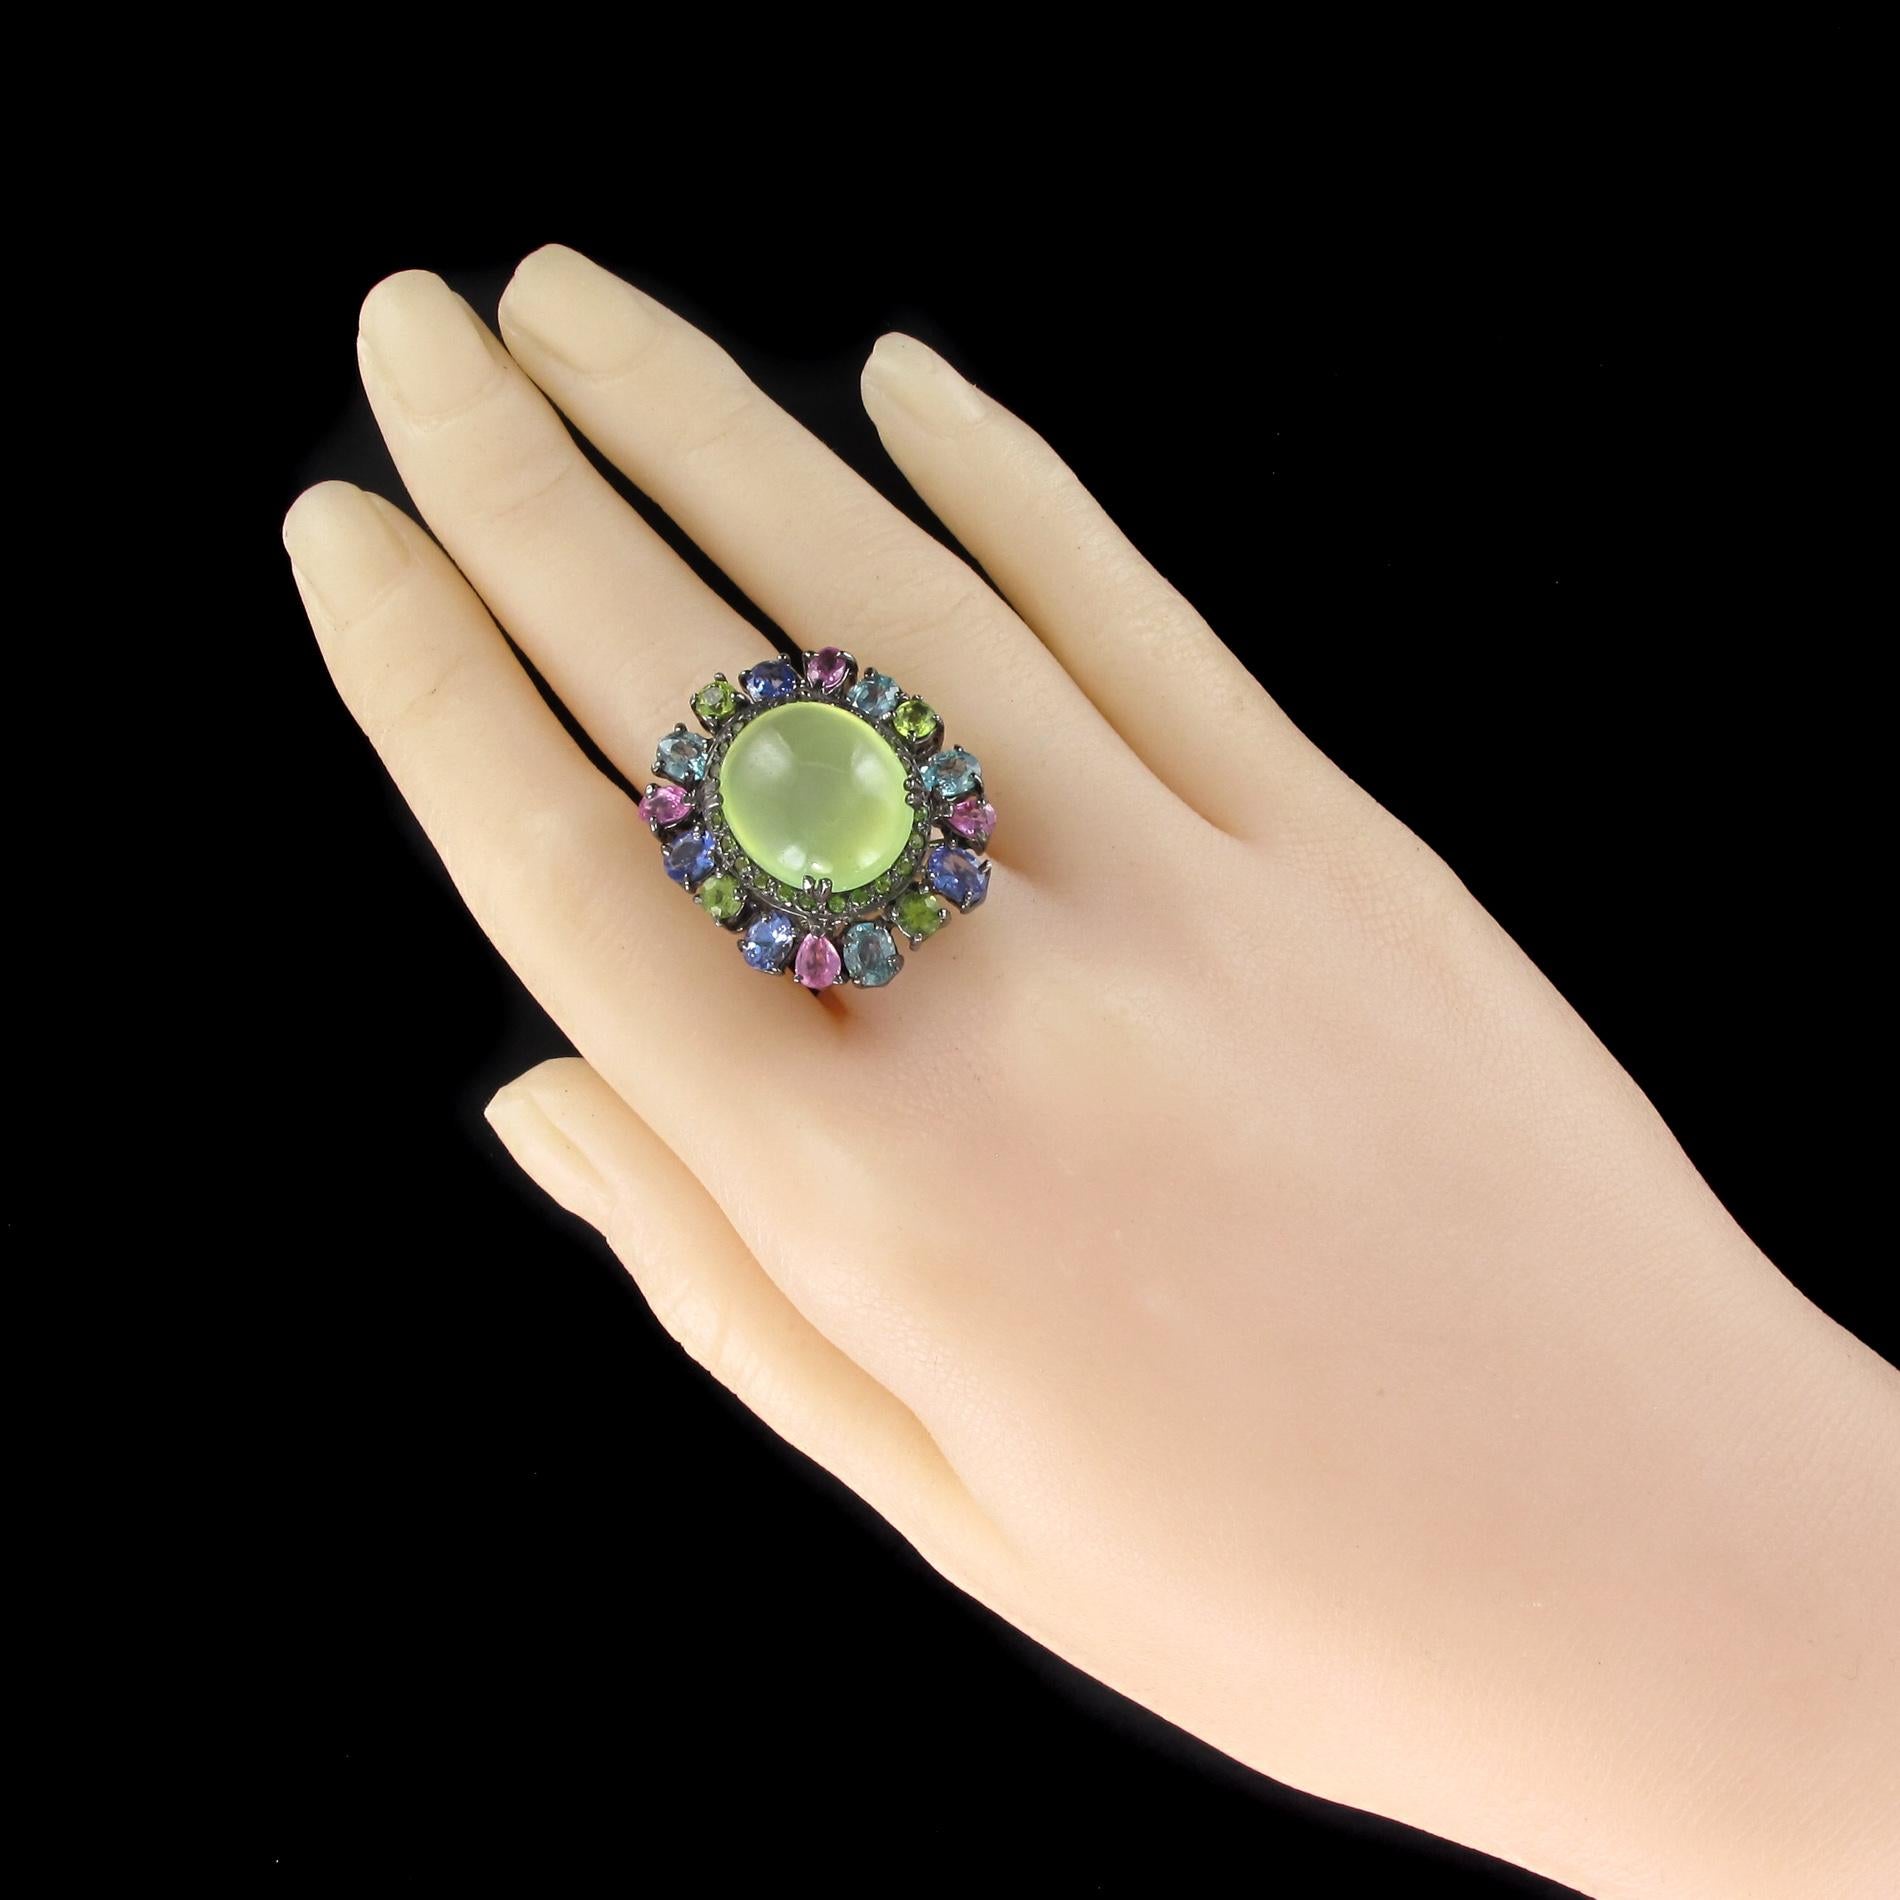 Ring in silver, partially black rhodium-plated on the plate.
Sumptuous gemstone ring, the setting is set in the center with 4 x 2 claws of a prehnite cabochon surrounded by peridots and a set of precious stones offset claws set to give a beautiful